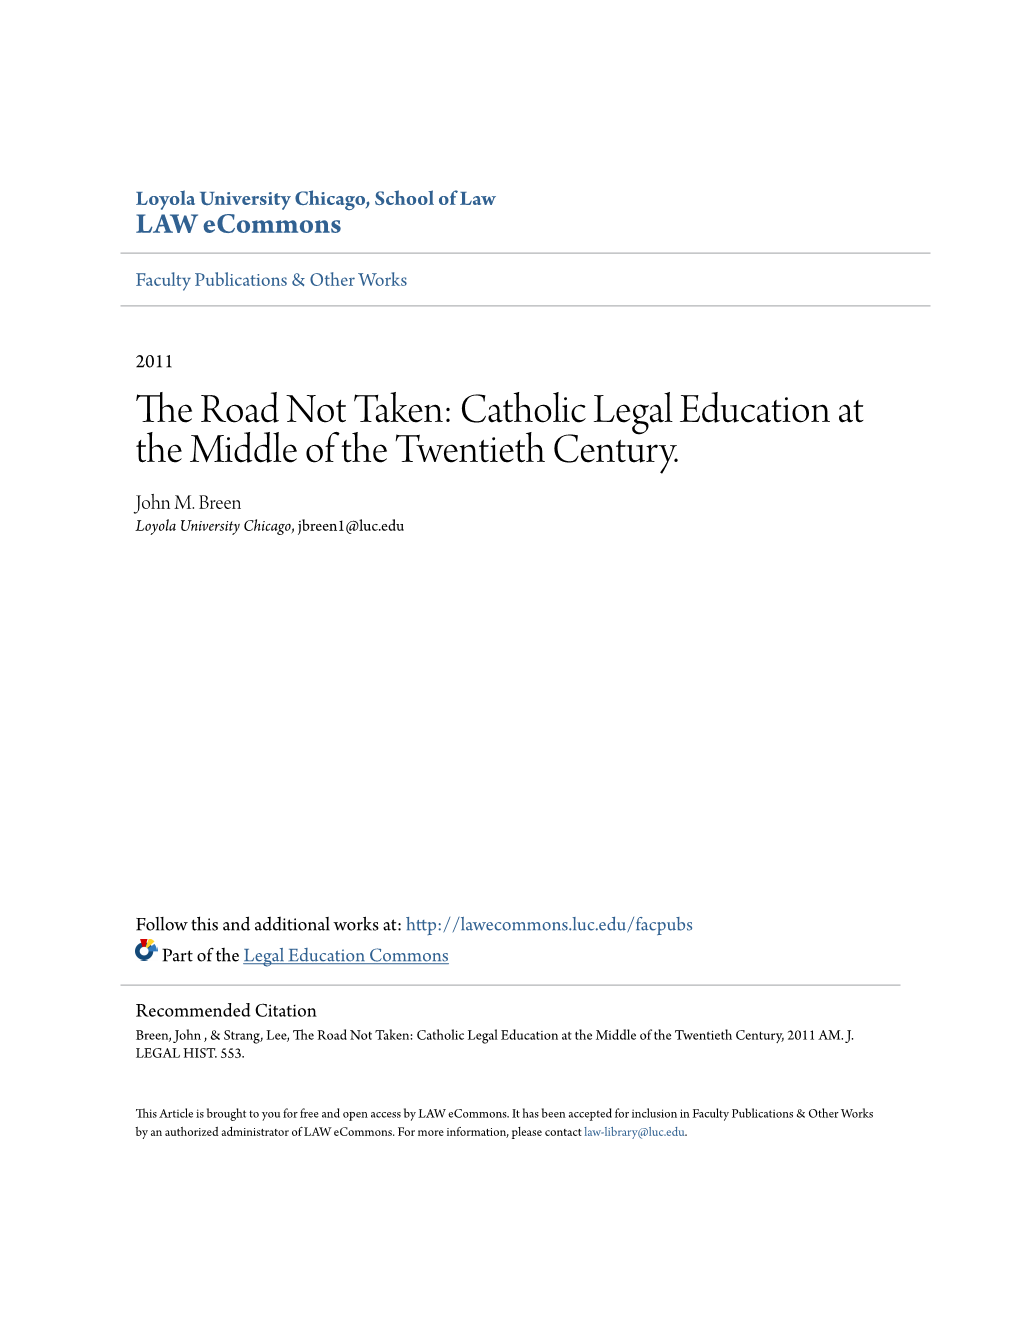 Catholic Legal Education at the Middle of the Twentieth Century